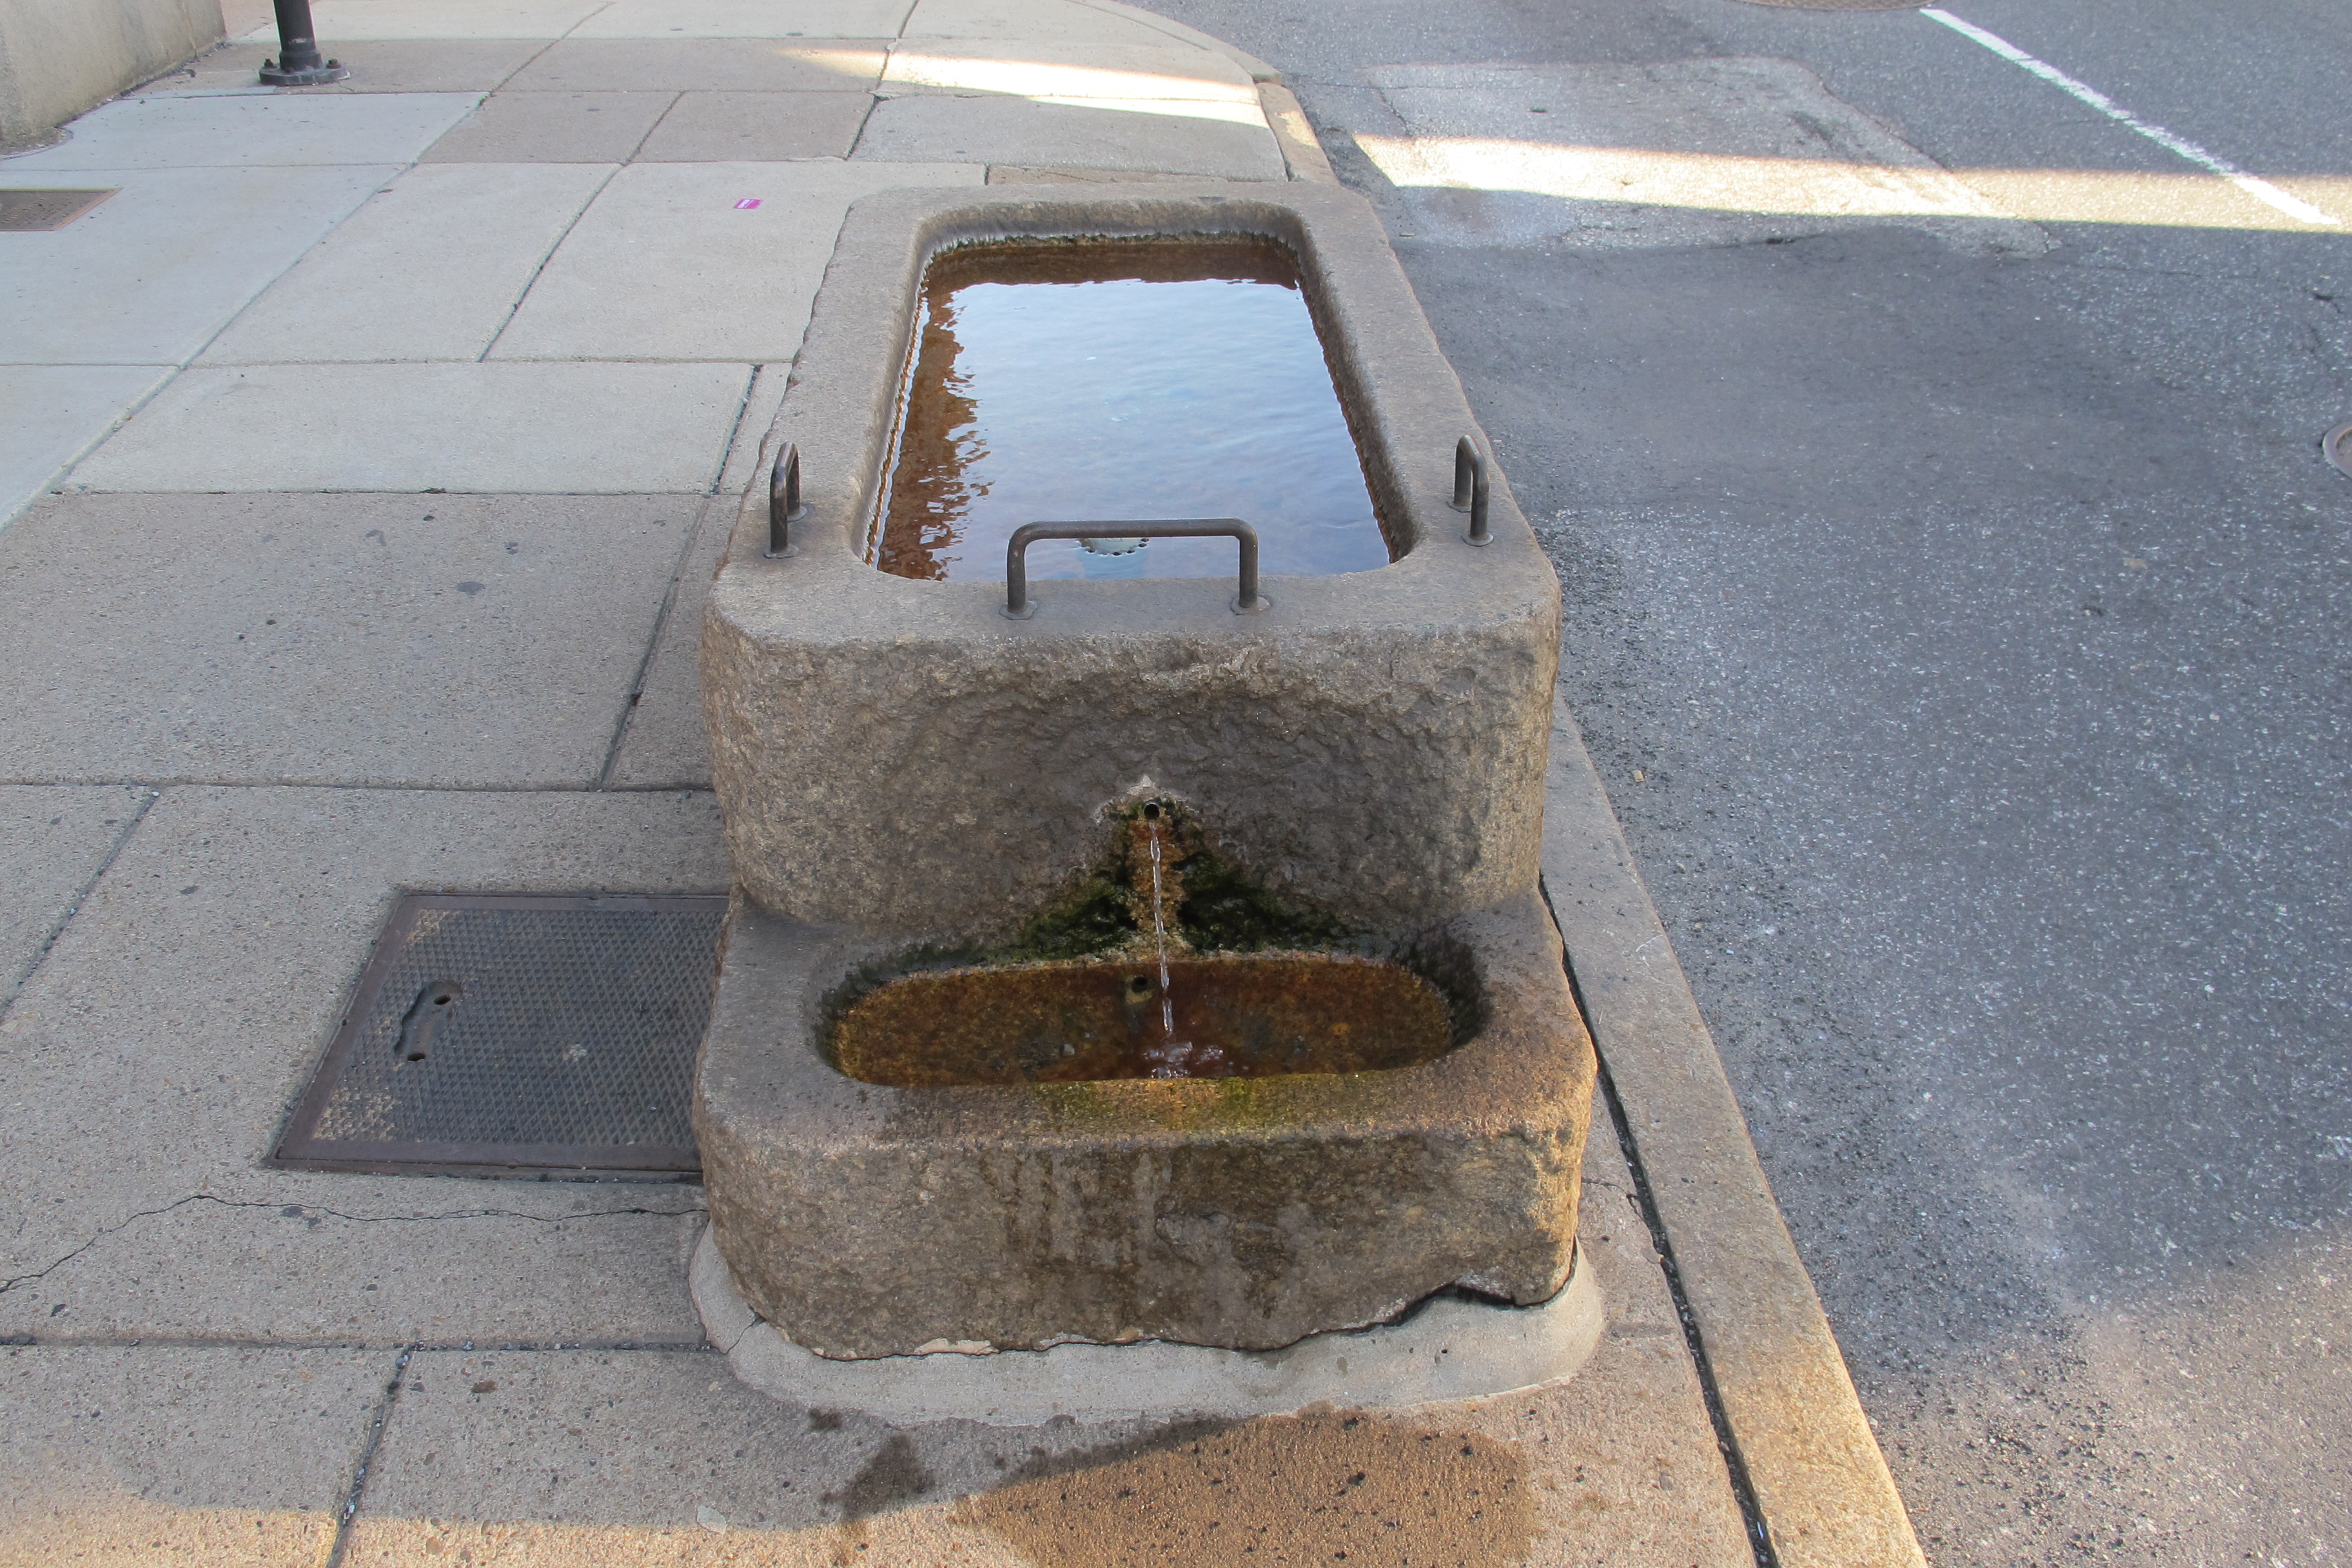 Bi-level troughs, like this one outside Fireman's Hall on North 2nd Street, allowed for smaller animals like dogs to drink from the fountains too.